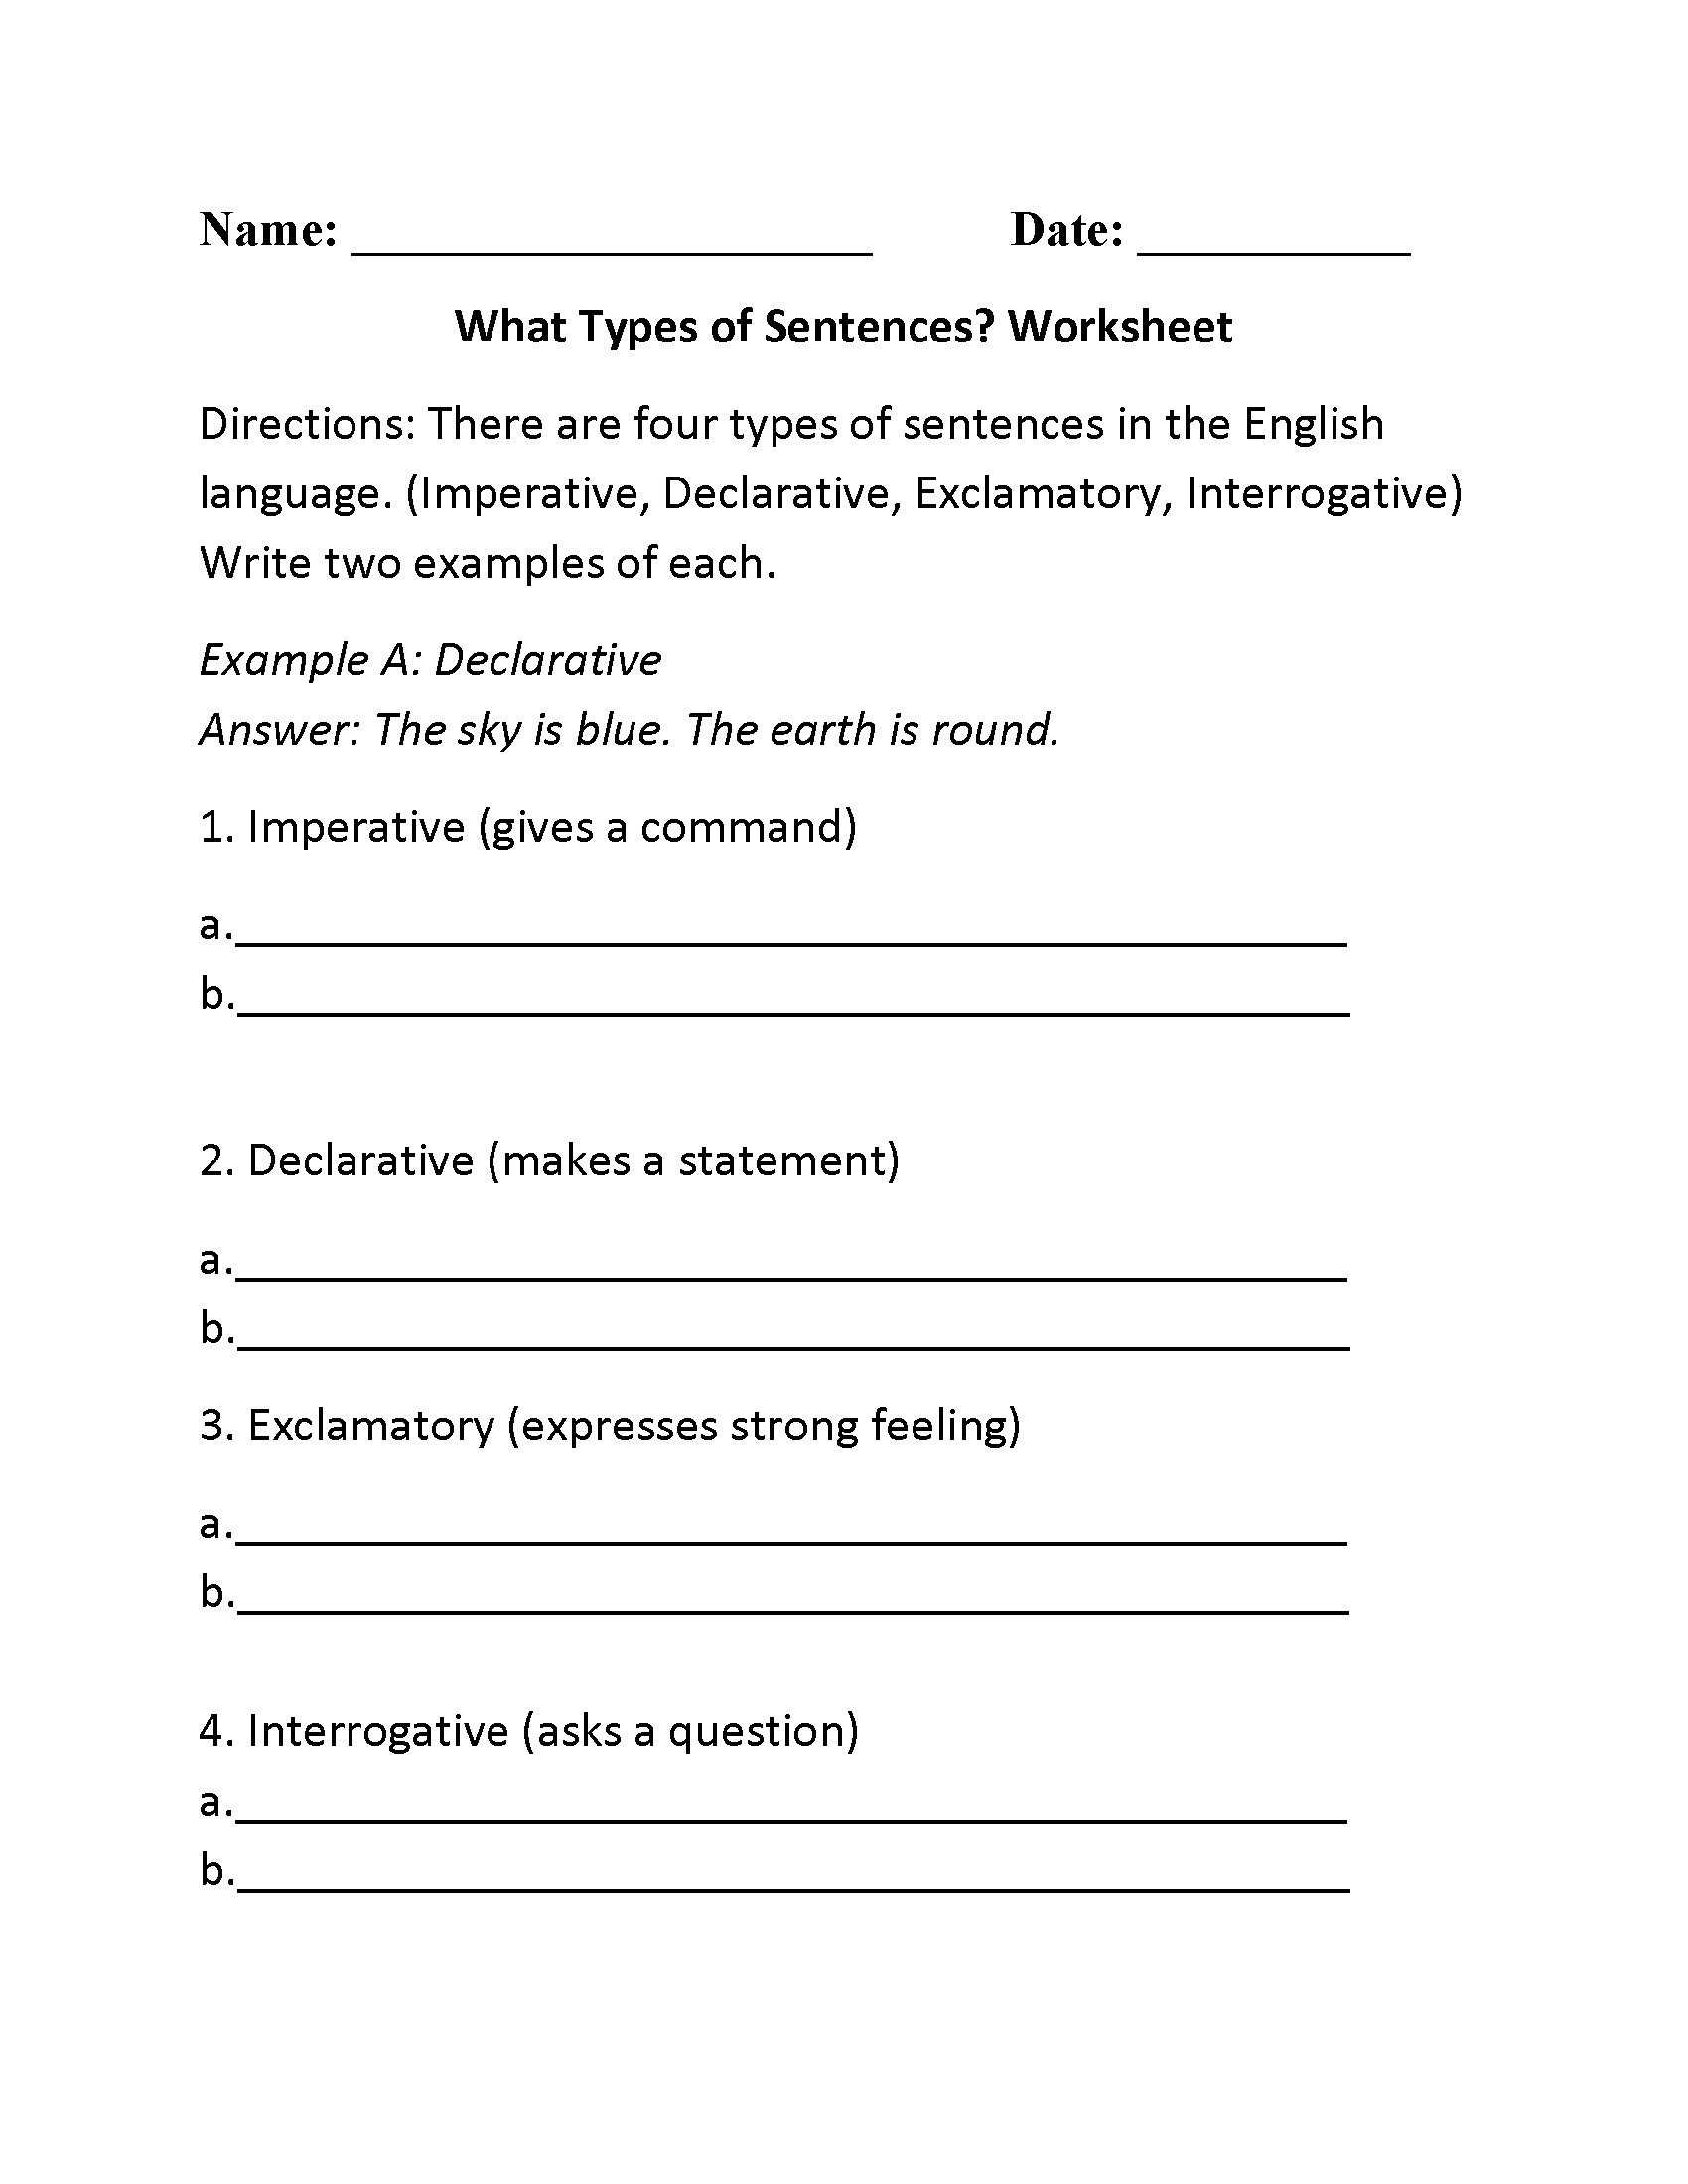 Simple and Compound Interest Worksheet Answers as Well as English Worksheet for Grade 3 New English Worksheets and Answers